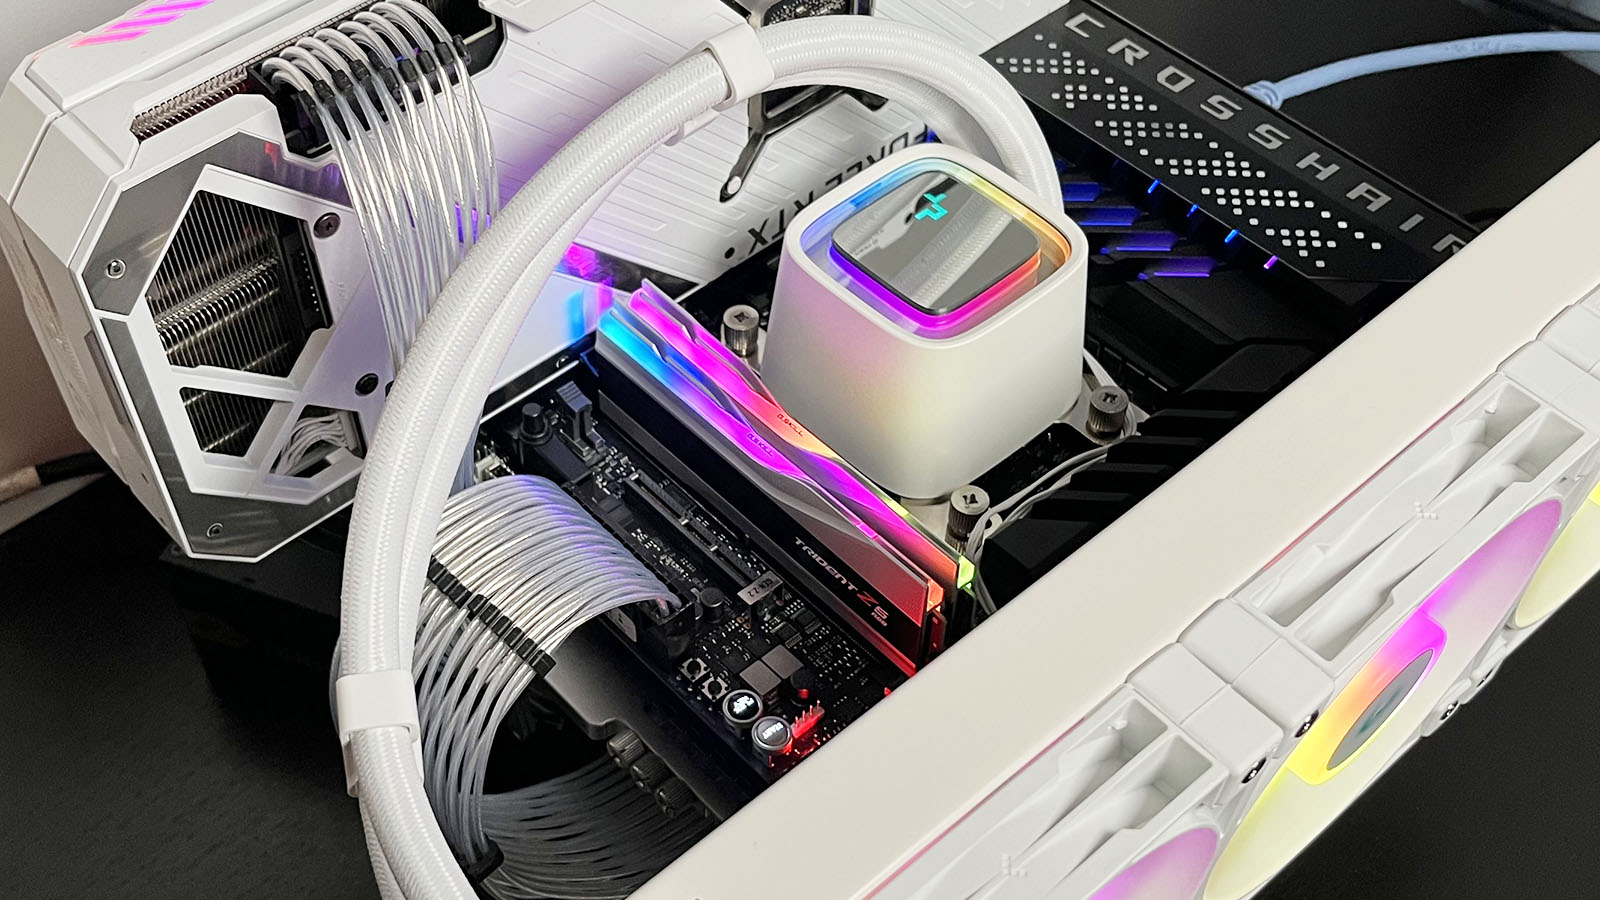 DeepCool LS720 WH 360 AIO CPU Cooler Review - Funky Kit